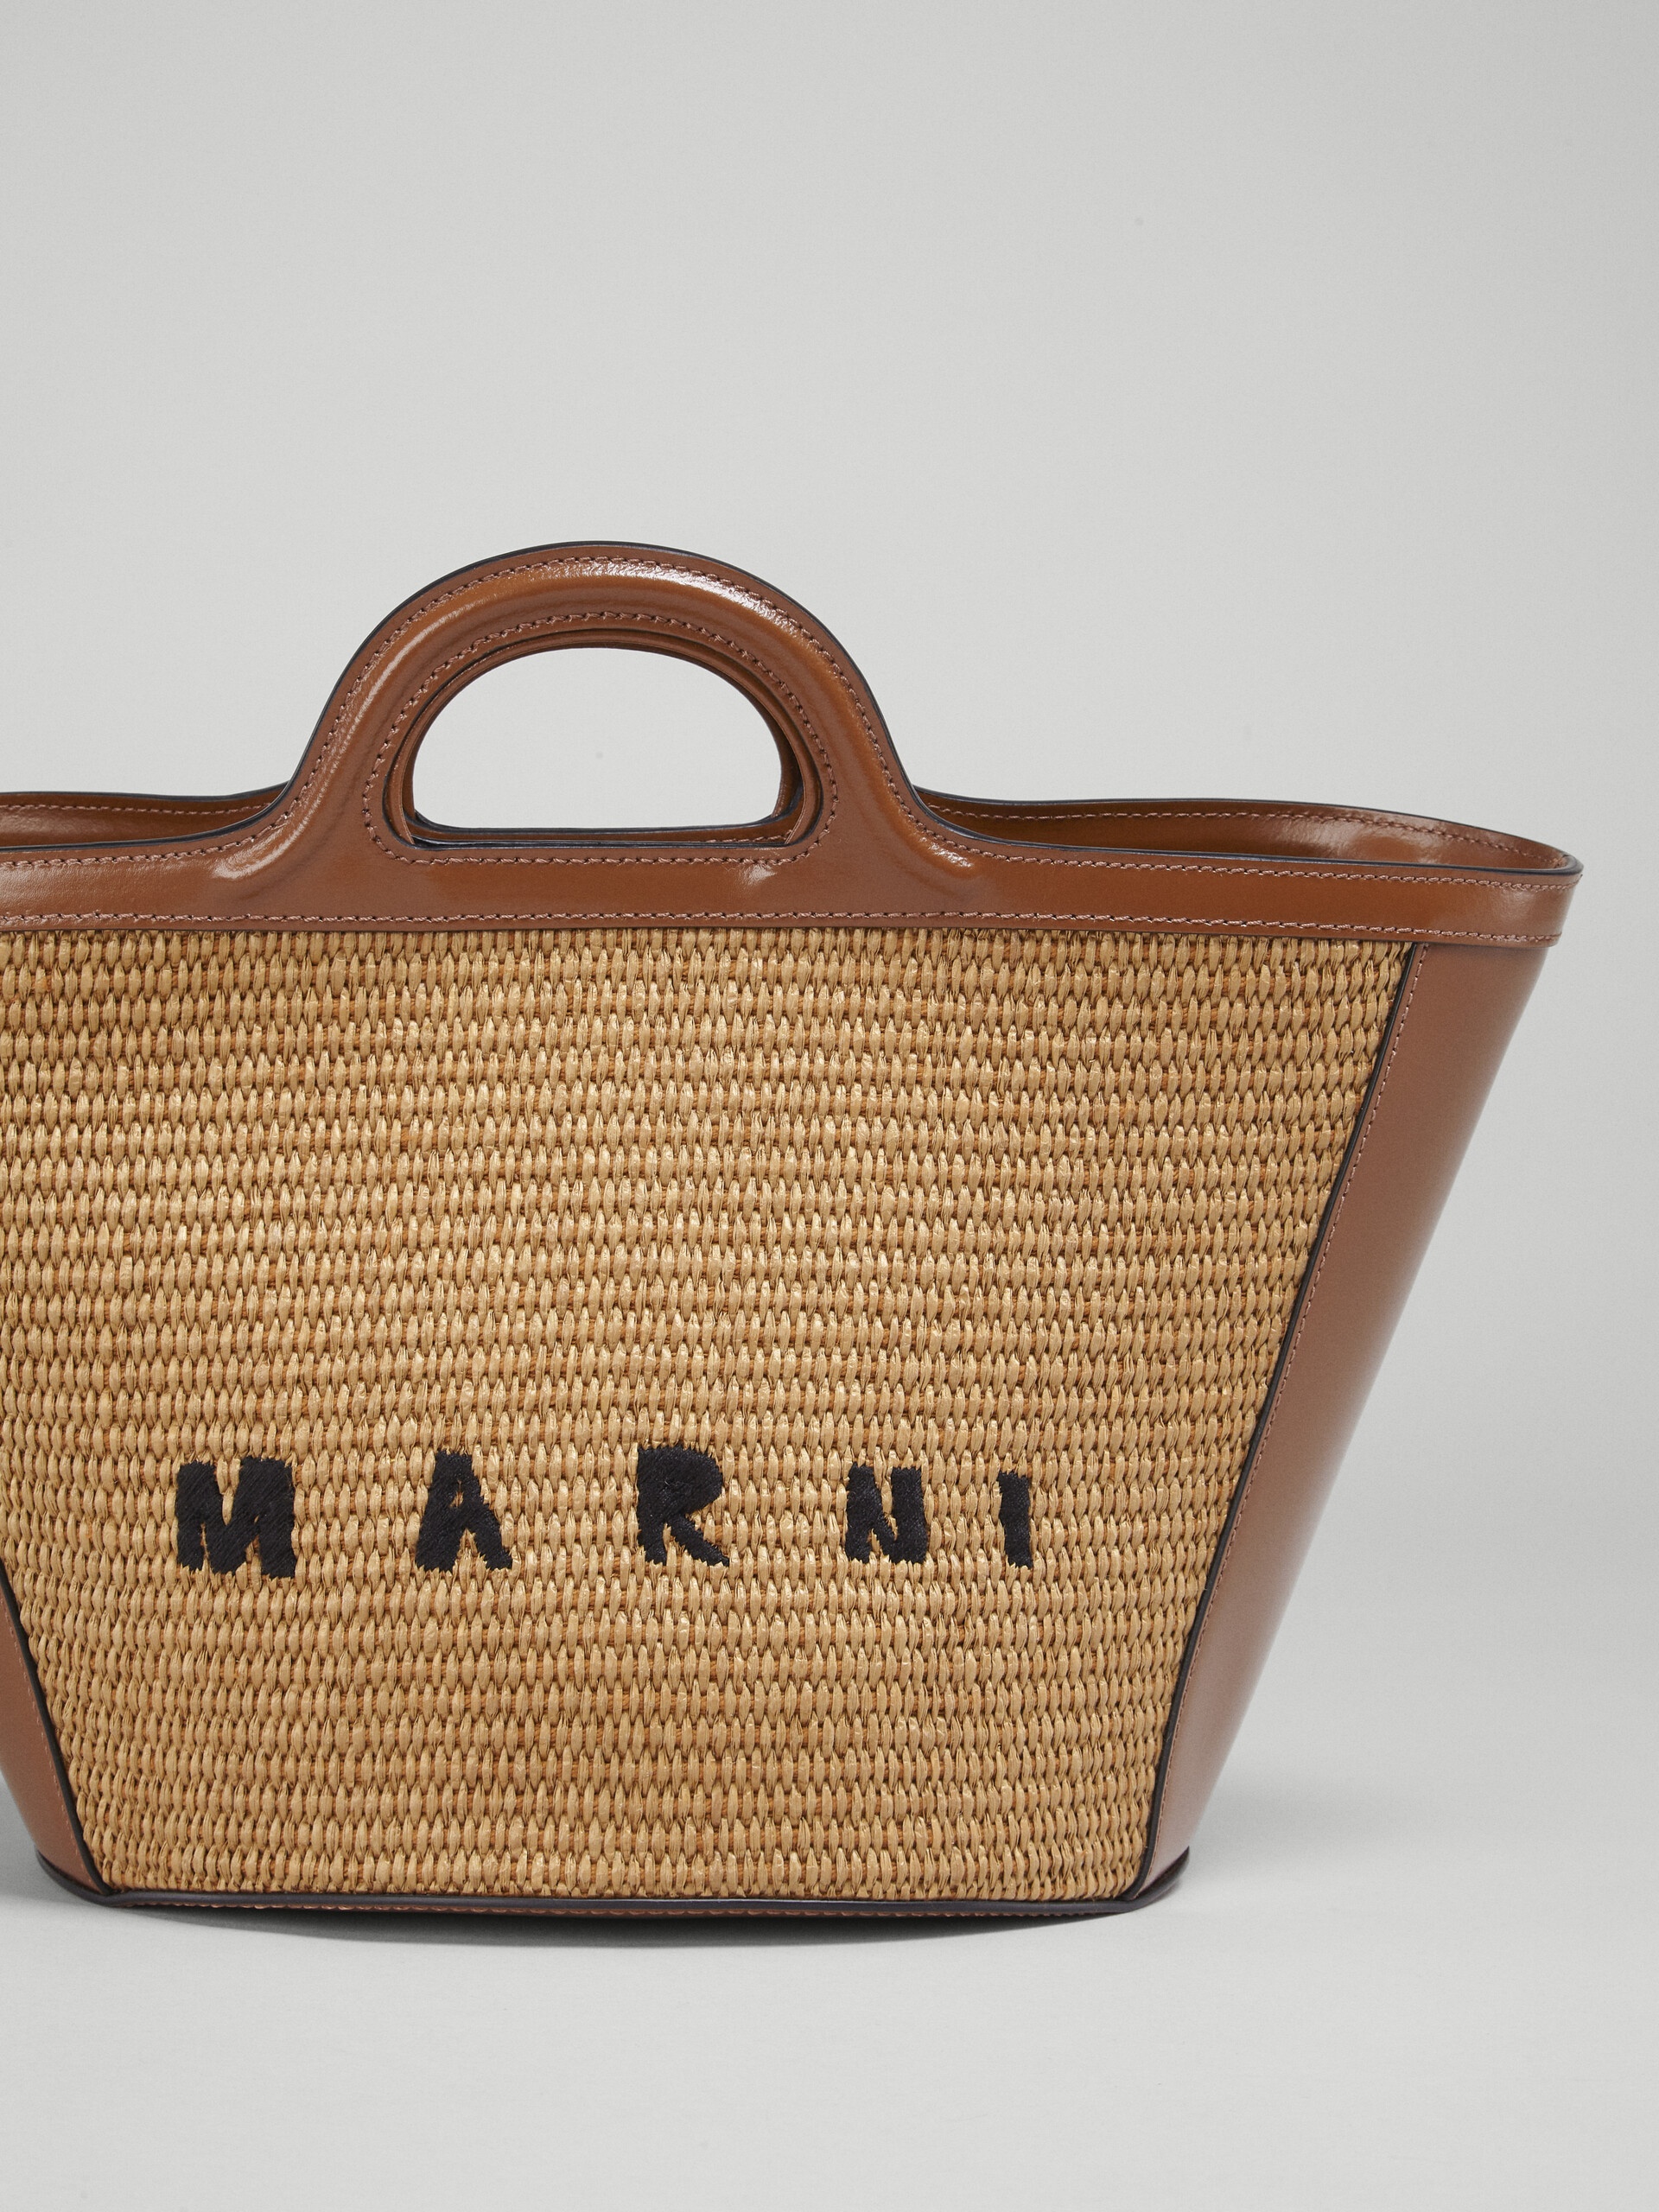 TROPICALIA SMALL BAG IN BROWN LEATHER AND RAFFIA - 4